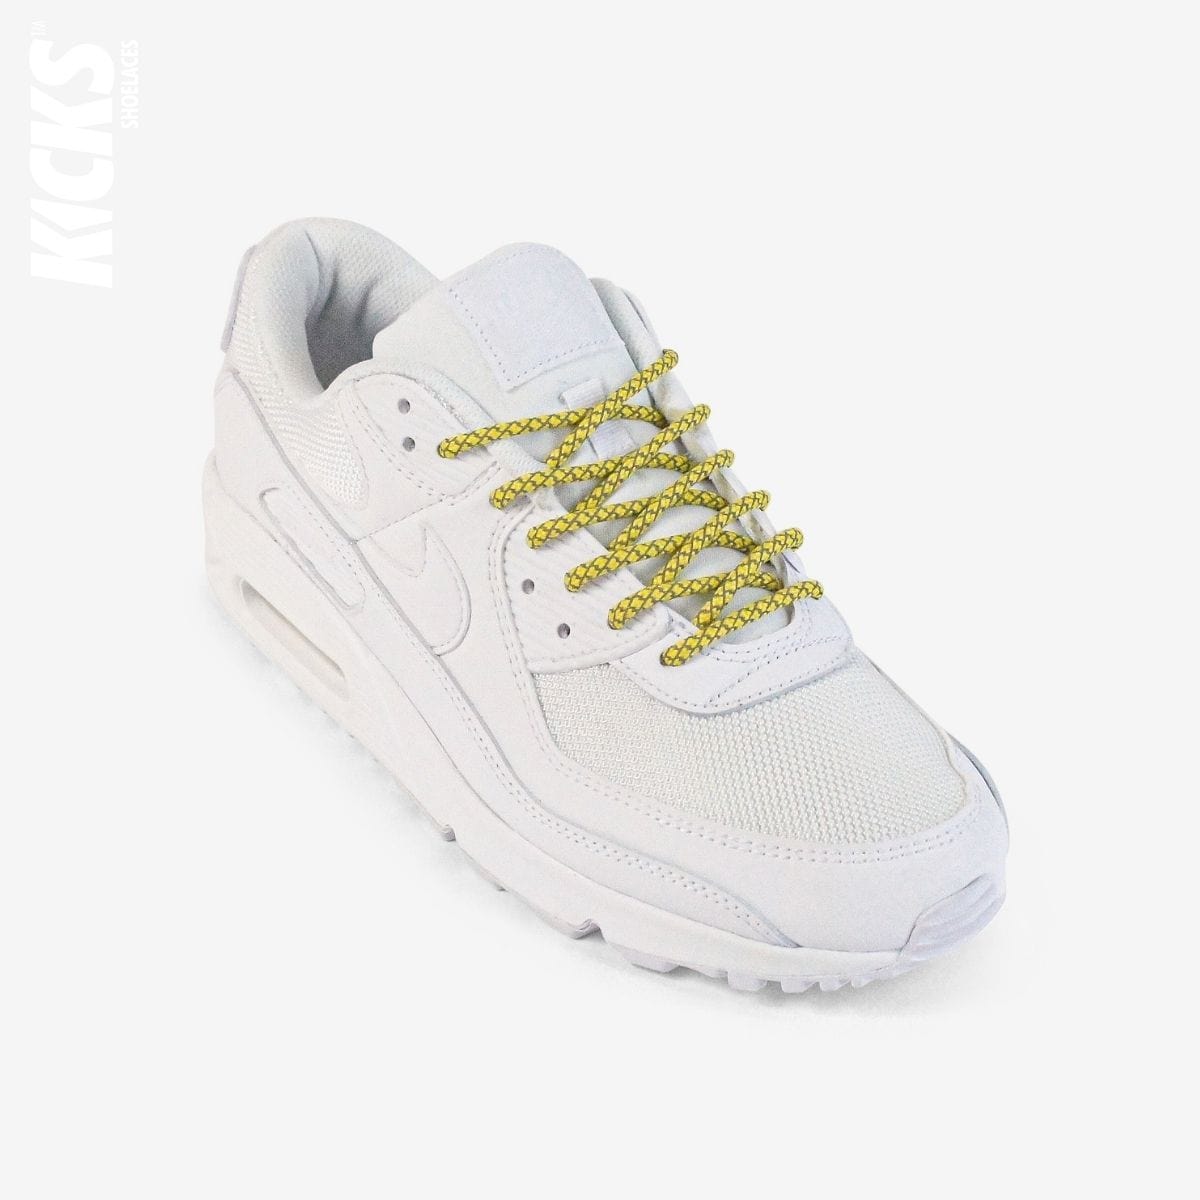 rope-laces-on-white-sneakers-with-kids-yellow-shoelaces